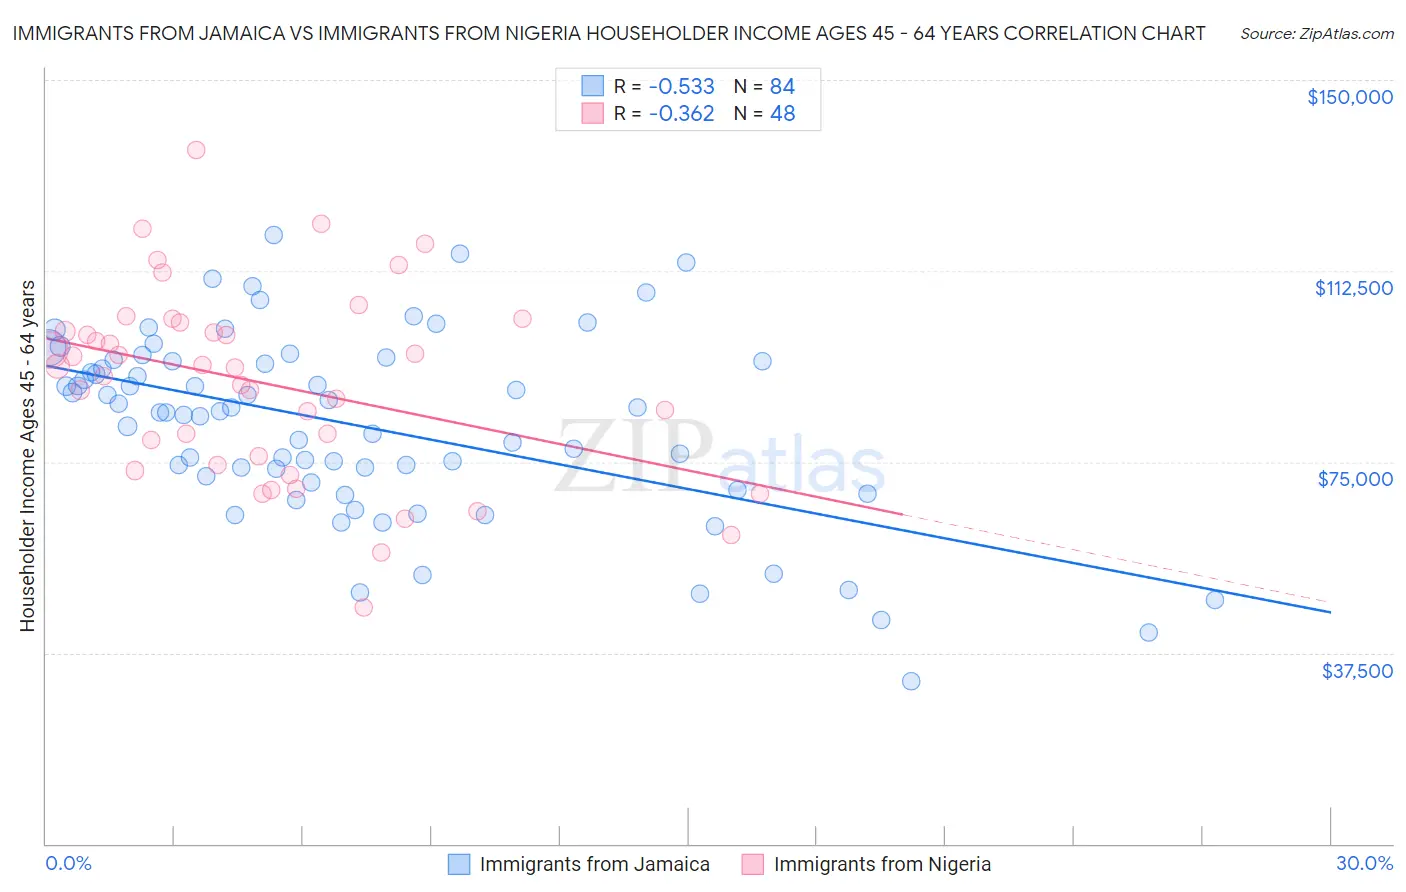 Immigrants from Jamaica vs Immigrants from Nigeria Householder Income Ages 45 - 64 years